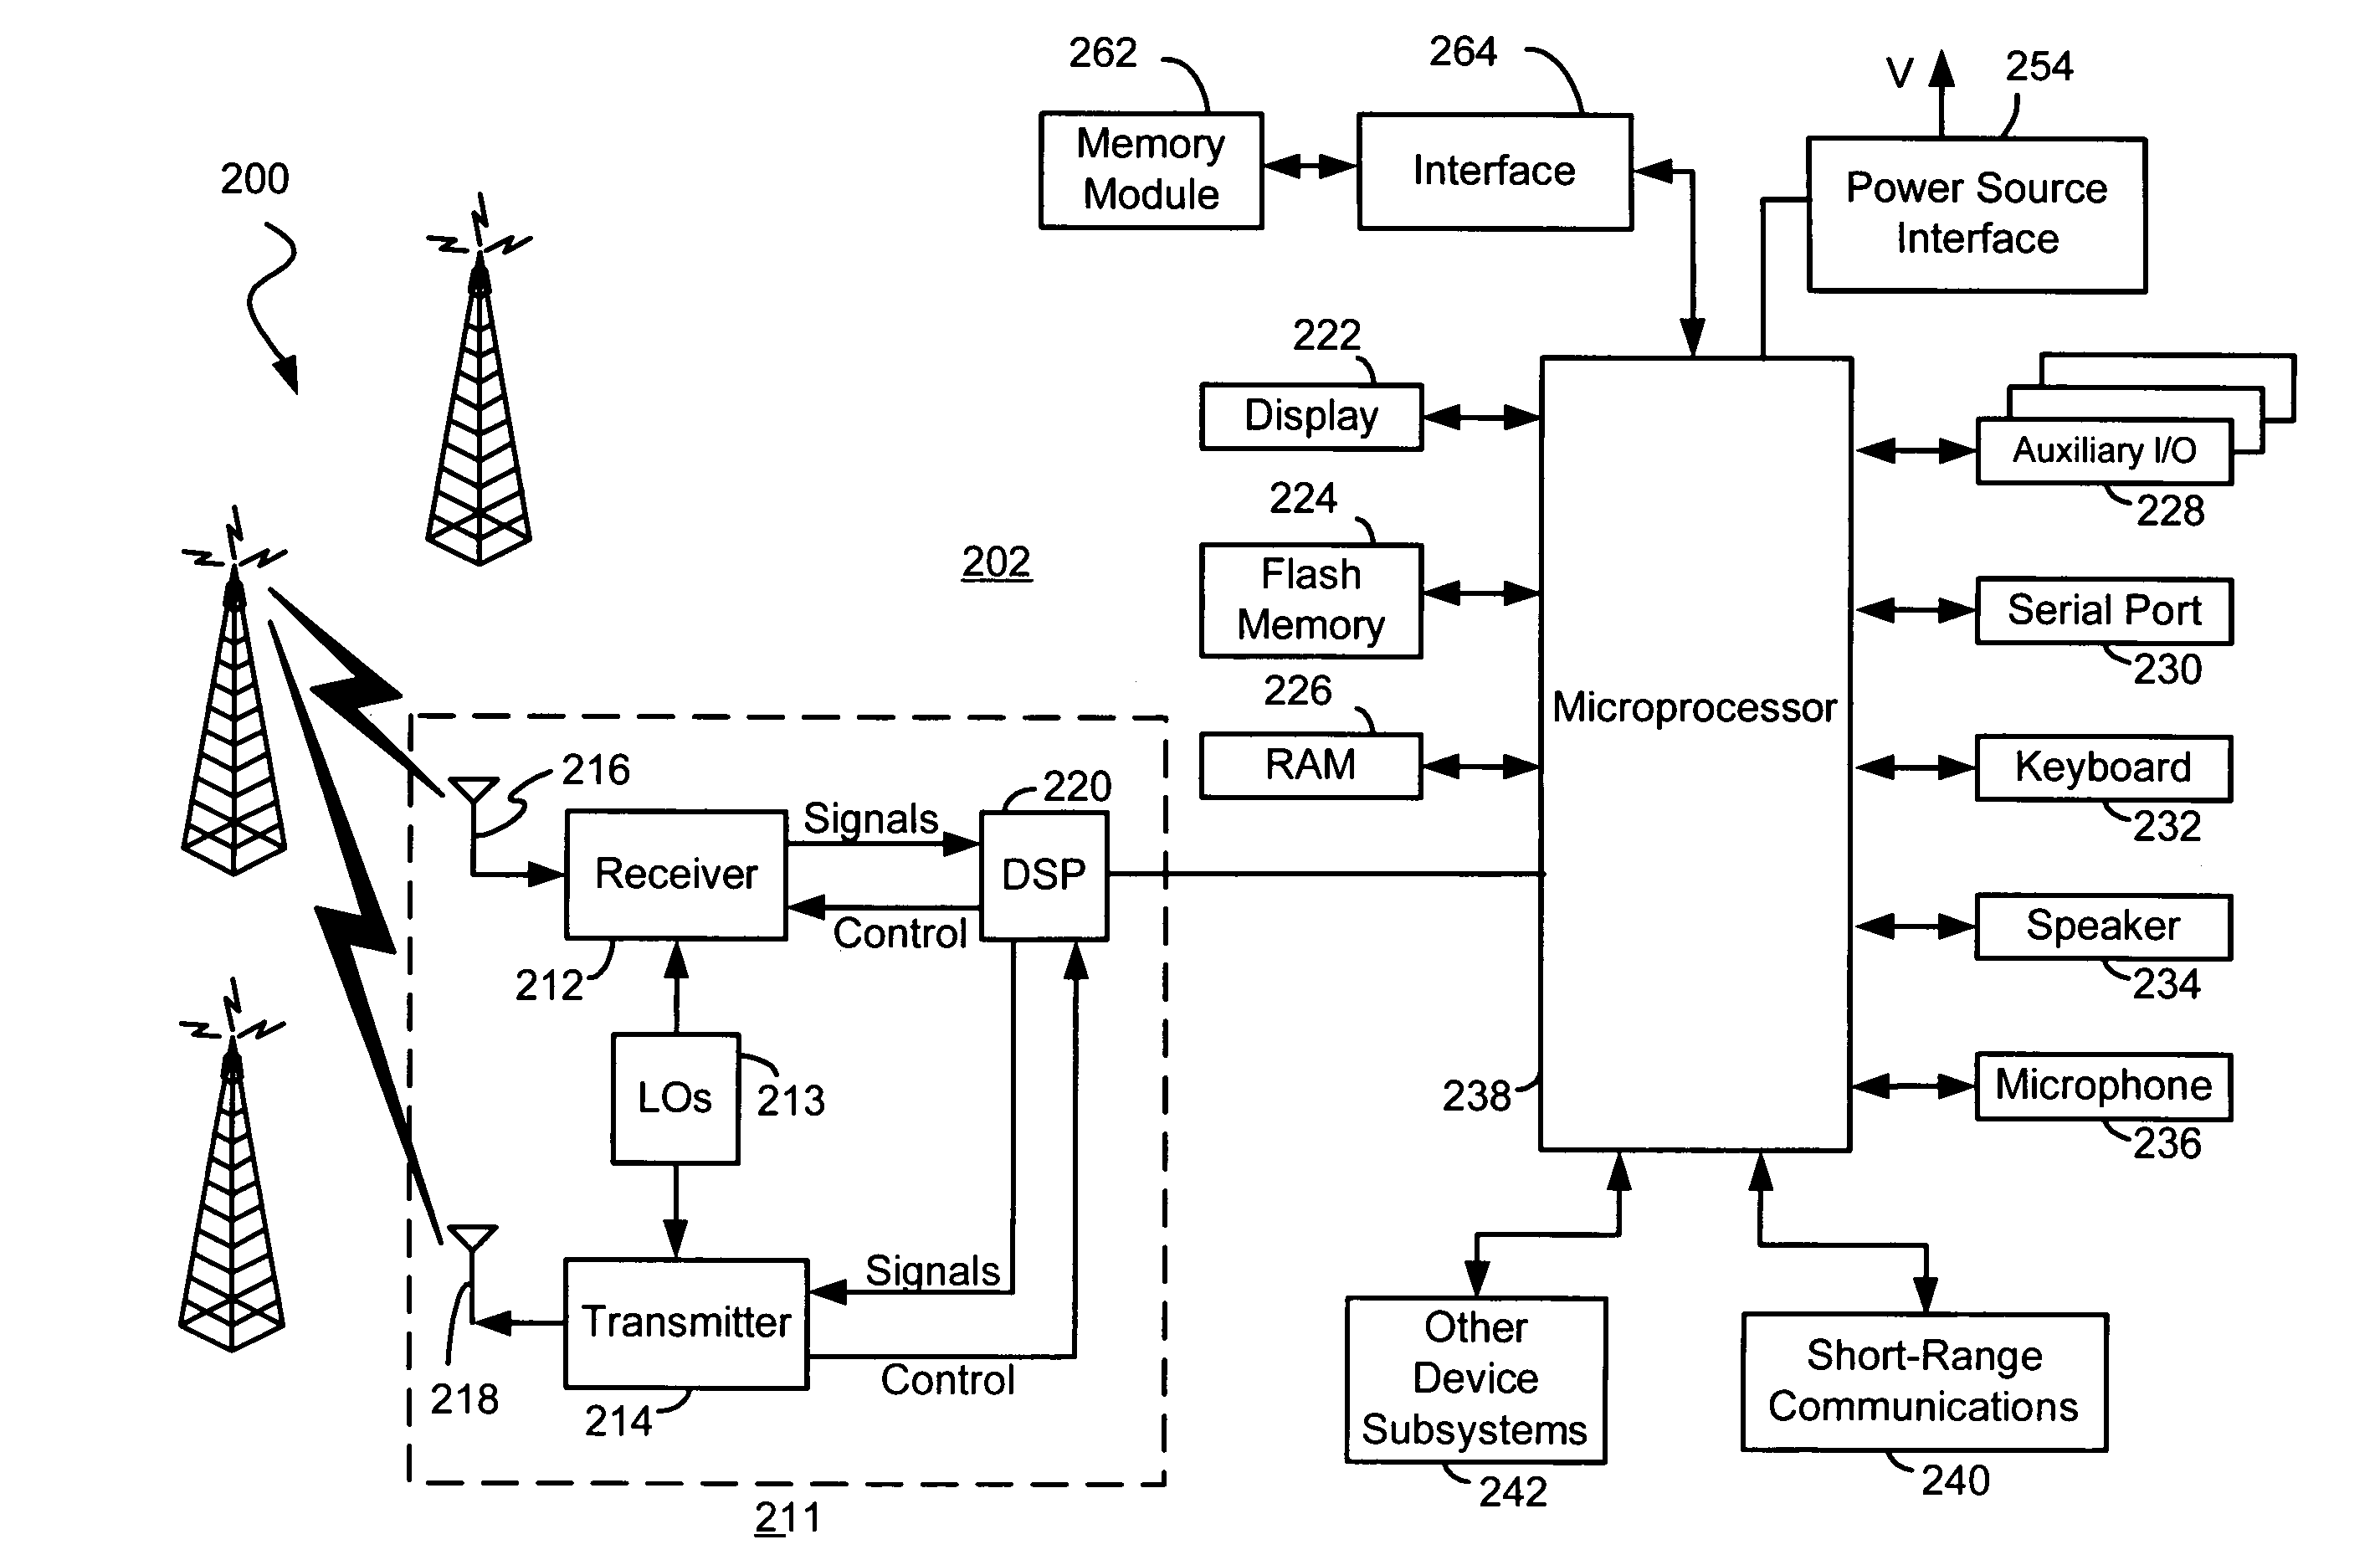 Methods and apparatus for terminating use of quick paging channel based on high capacity power source usage